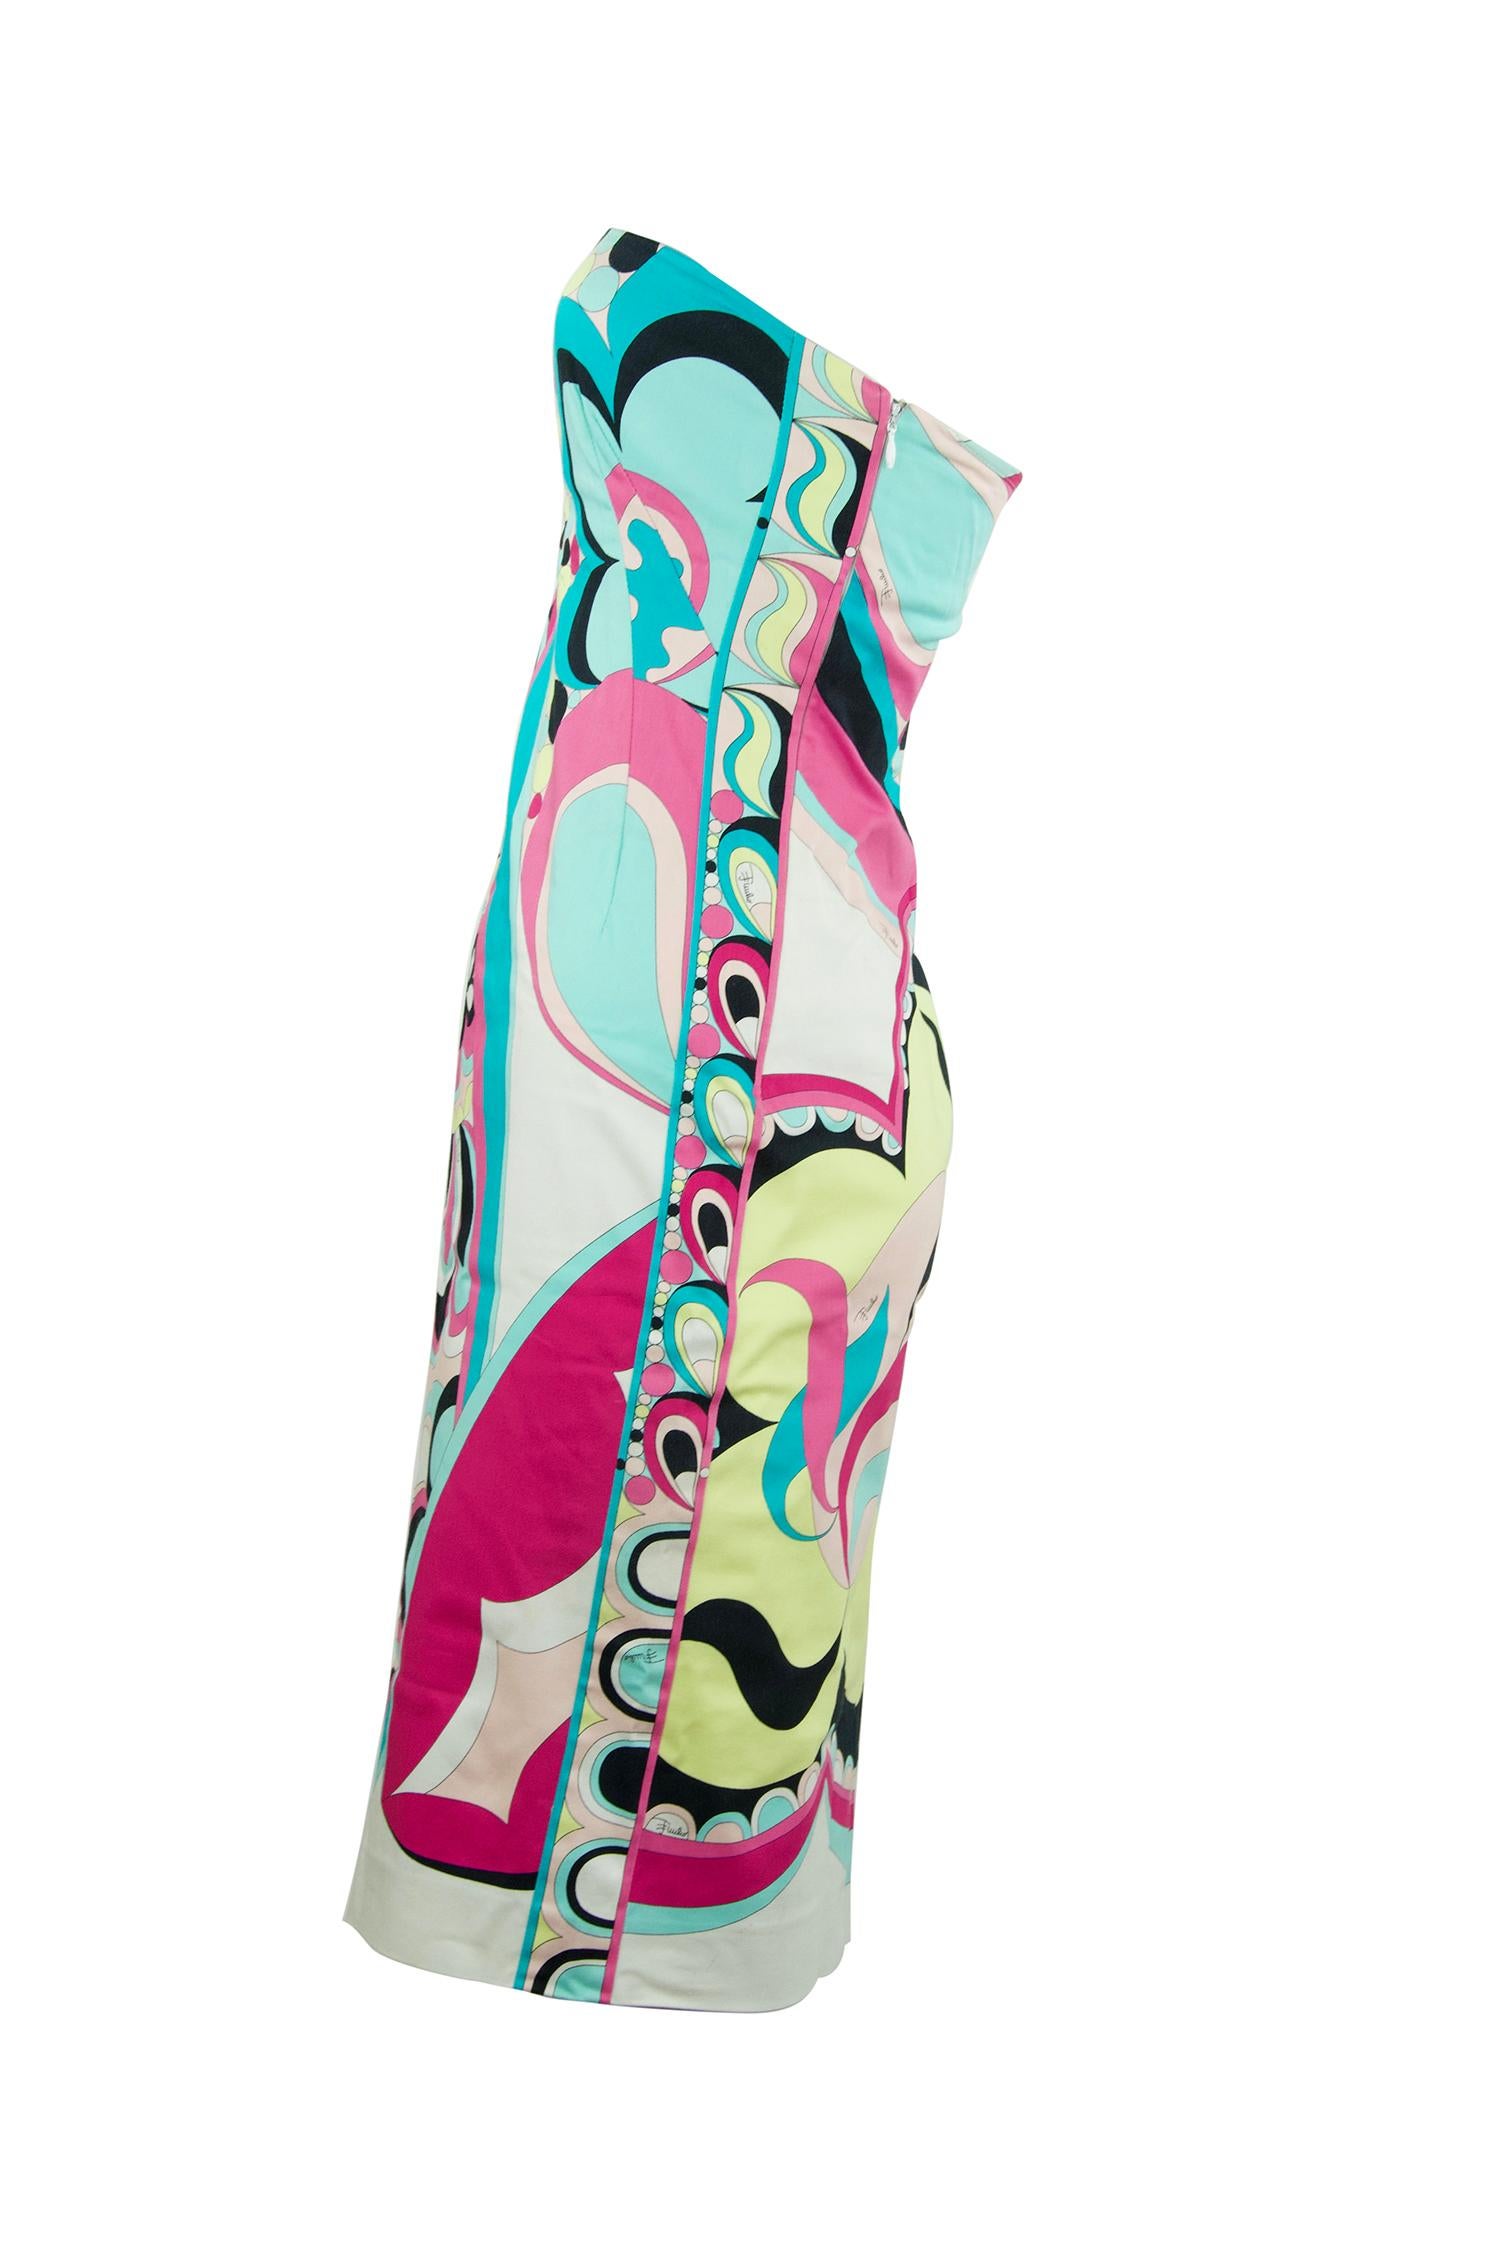 Classic fun and vibrant geometric Pucci print strapless dress with stunning shades of pink, blue and yellow.  A Pucci classic.

Size: US 6

Condition: Very good condition

Composition: 97% cotton, 3% elastane / lining 96% cotton, 4% elastane

Care: